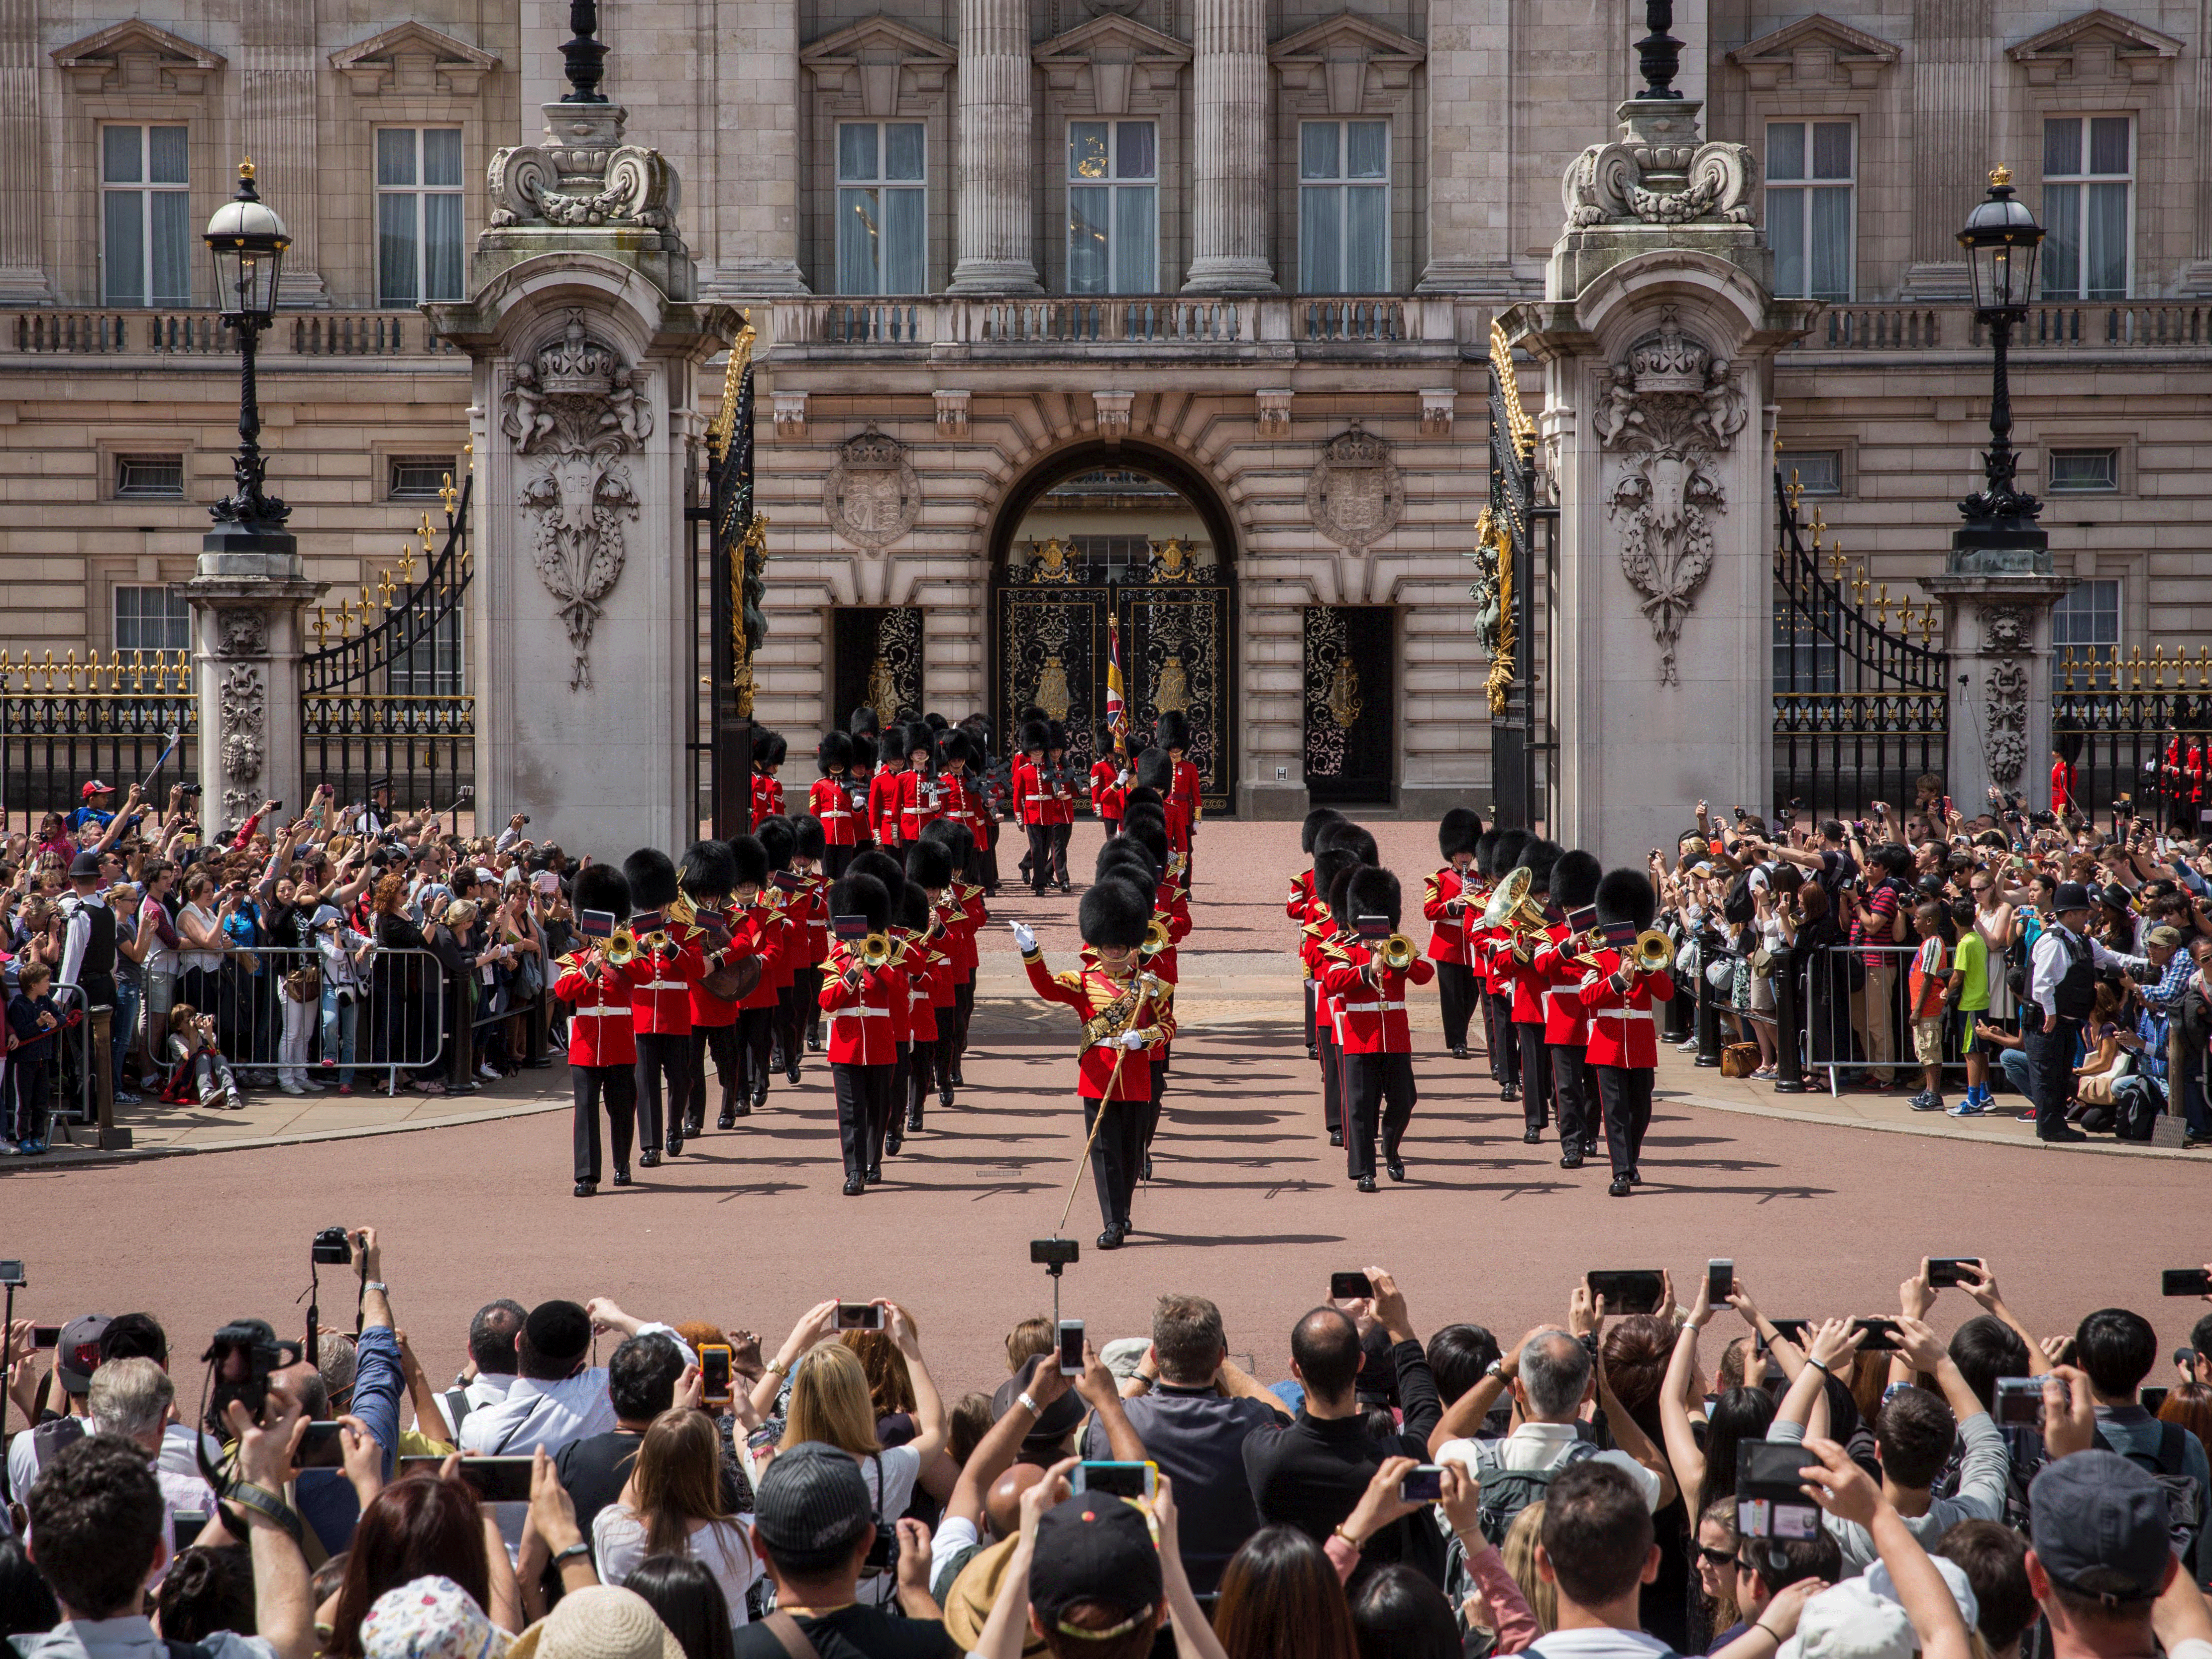 Let's give Buckingham Palace back to the people